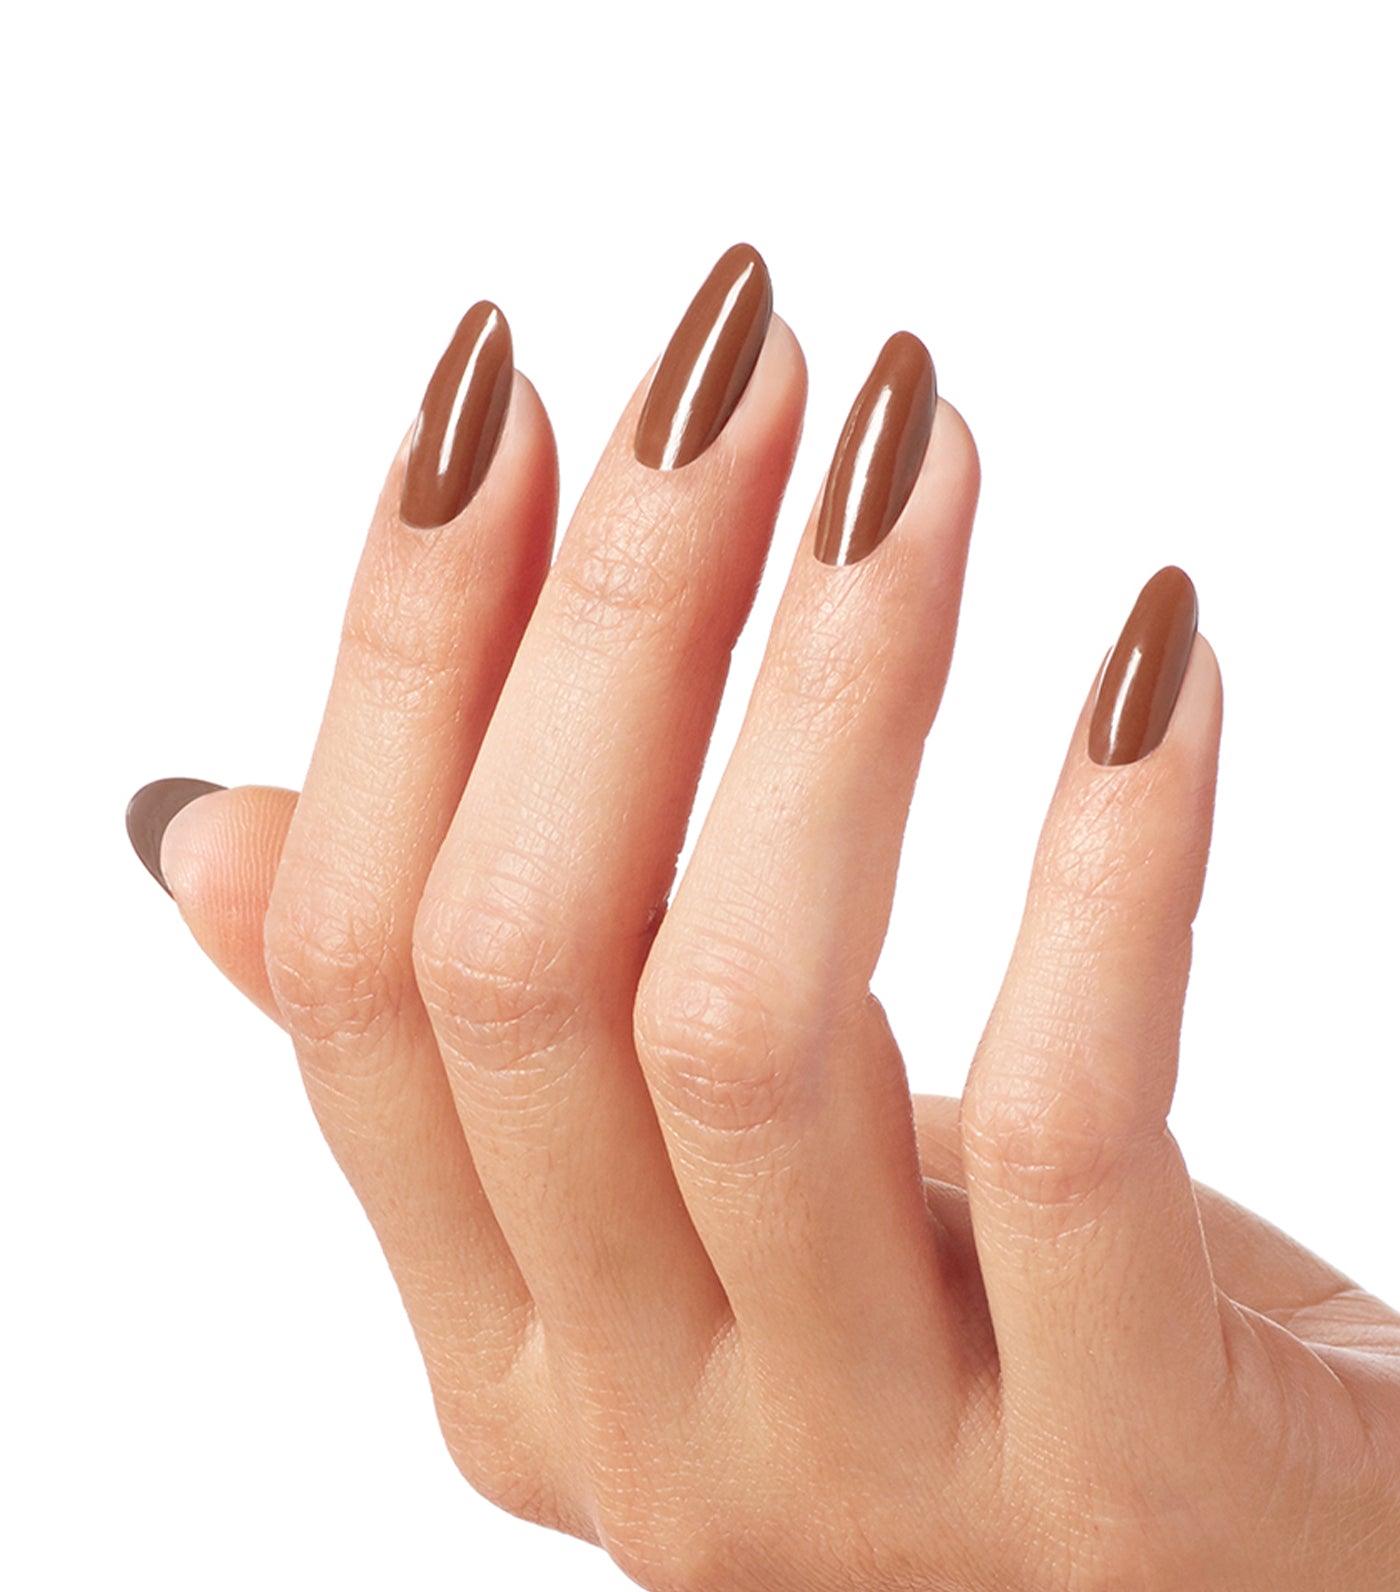 Nail Lacquer - Browns